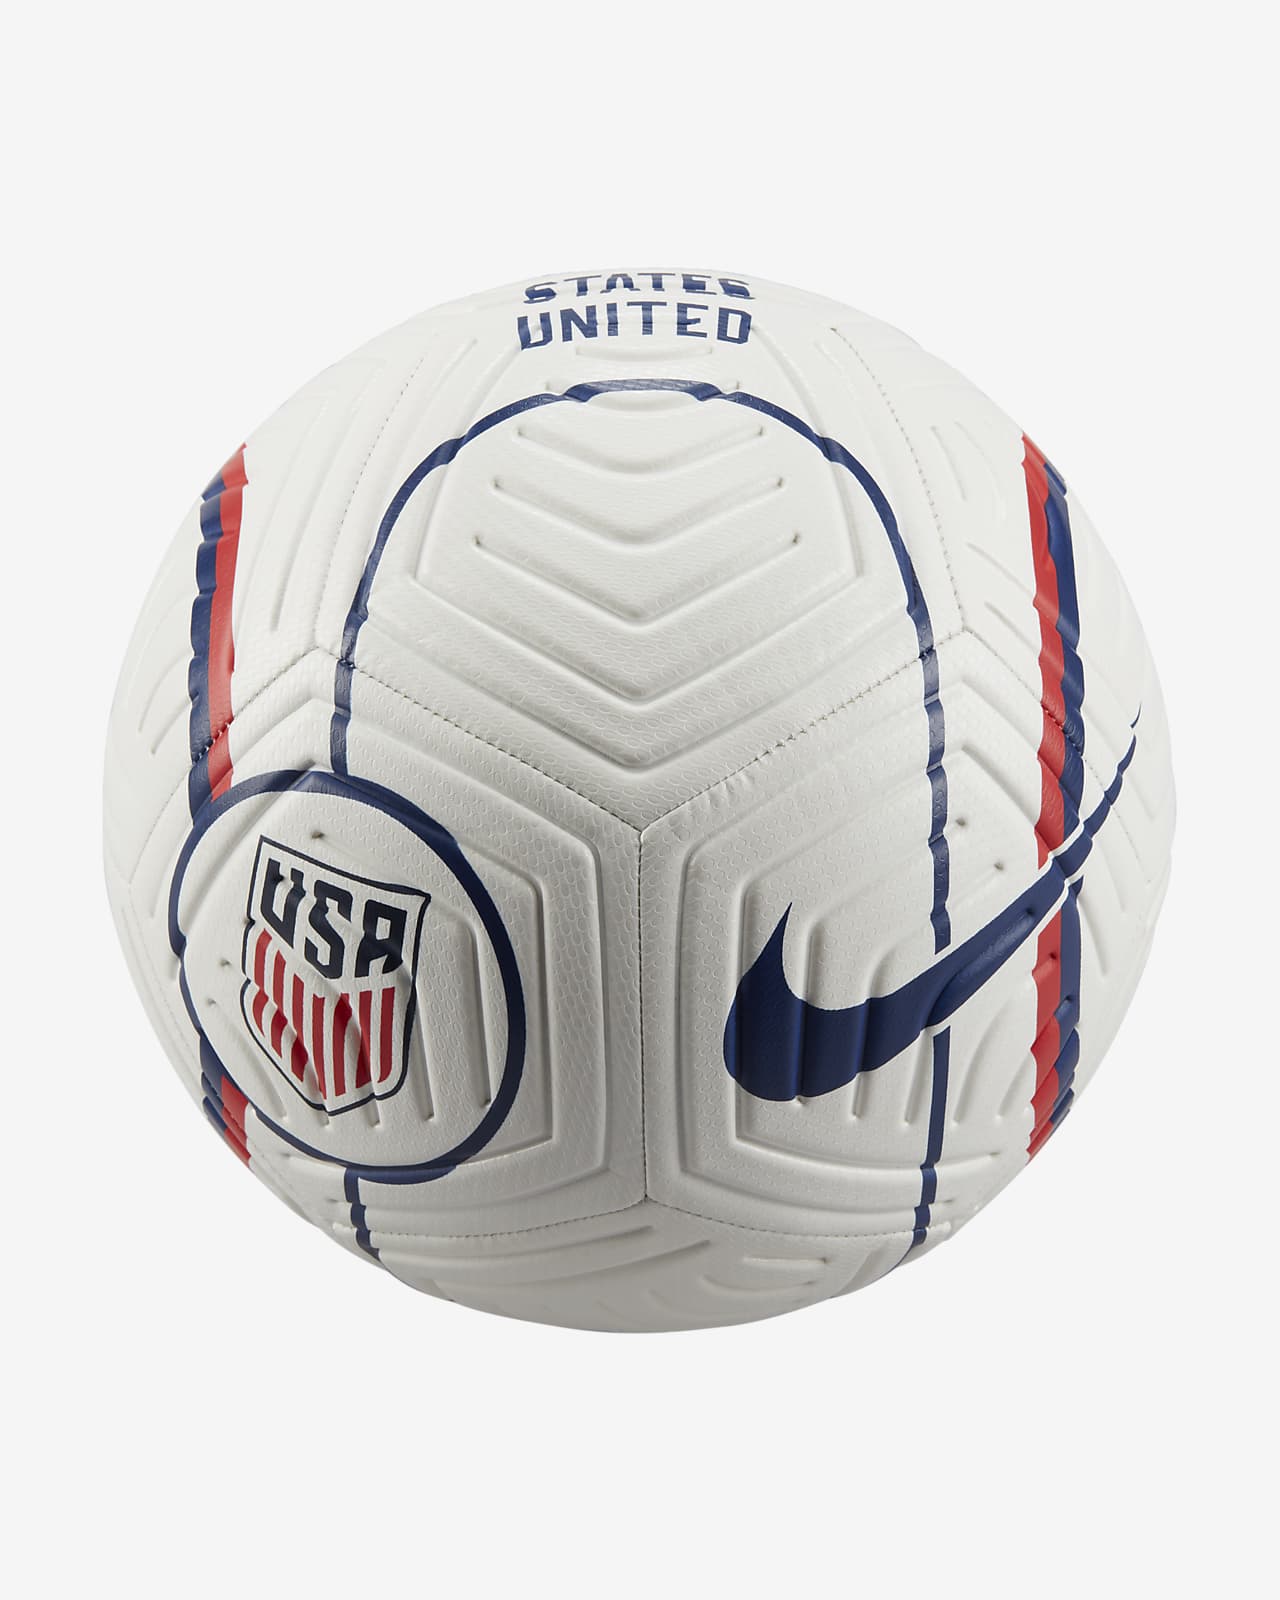 Coherent Dissipation have USA Strike Soccer Ball. Nike.com